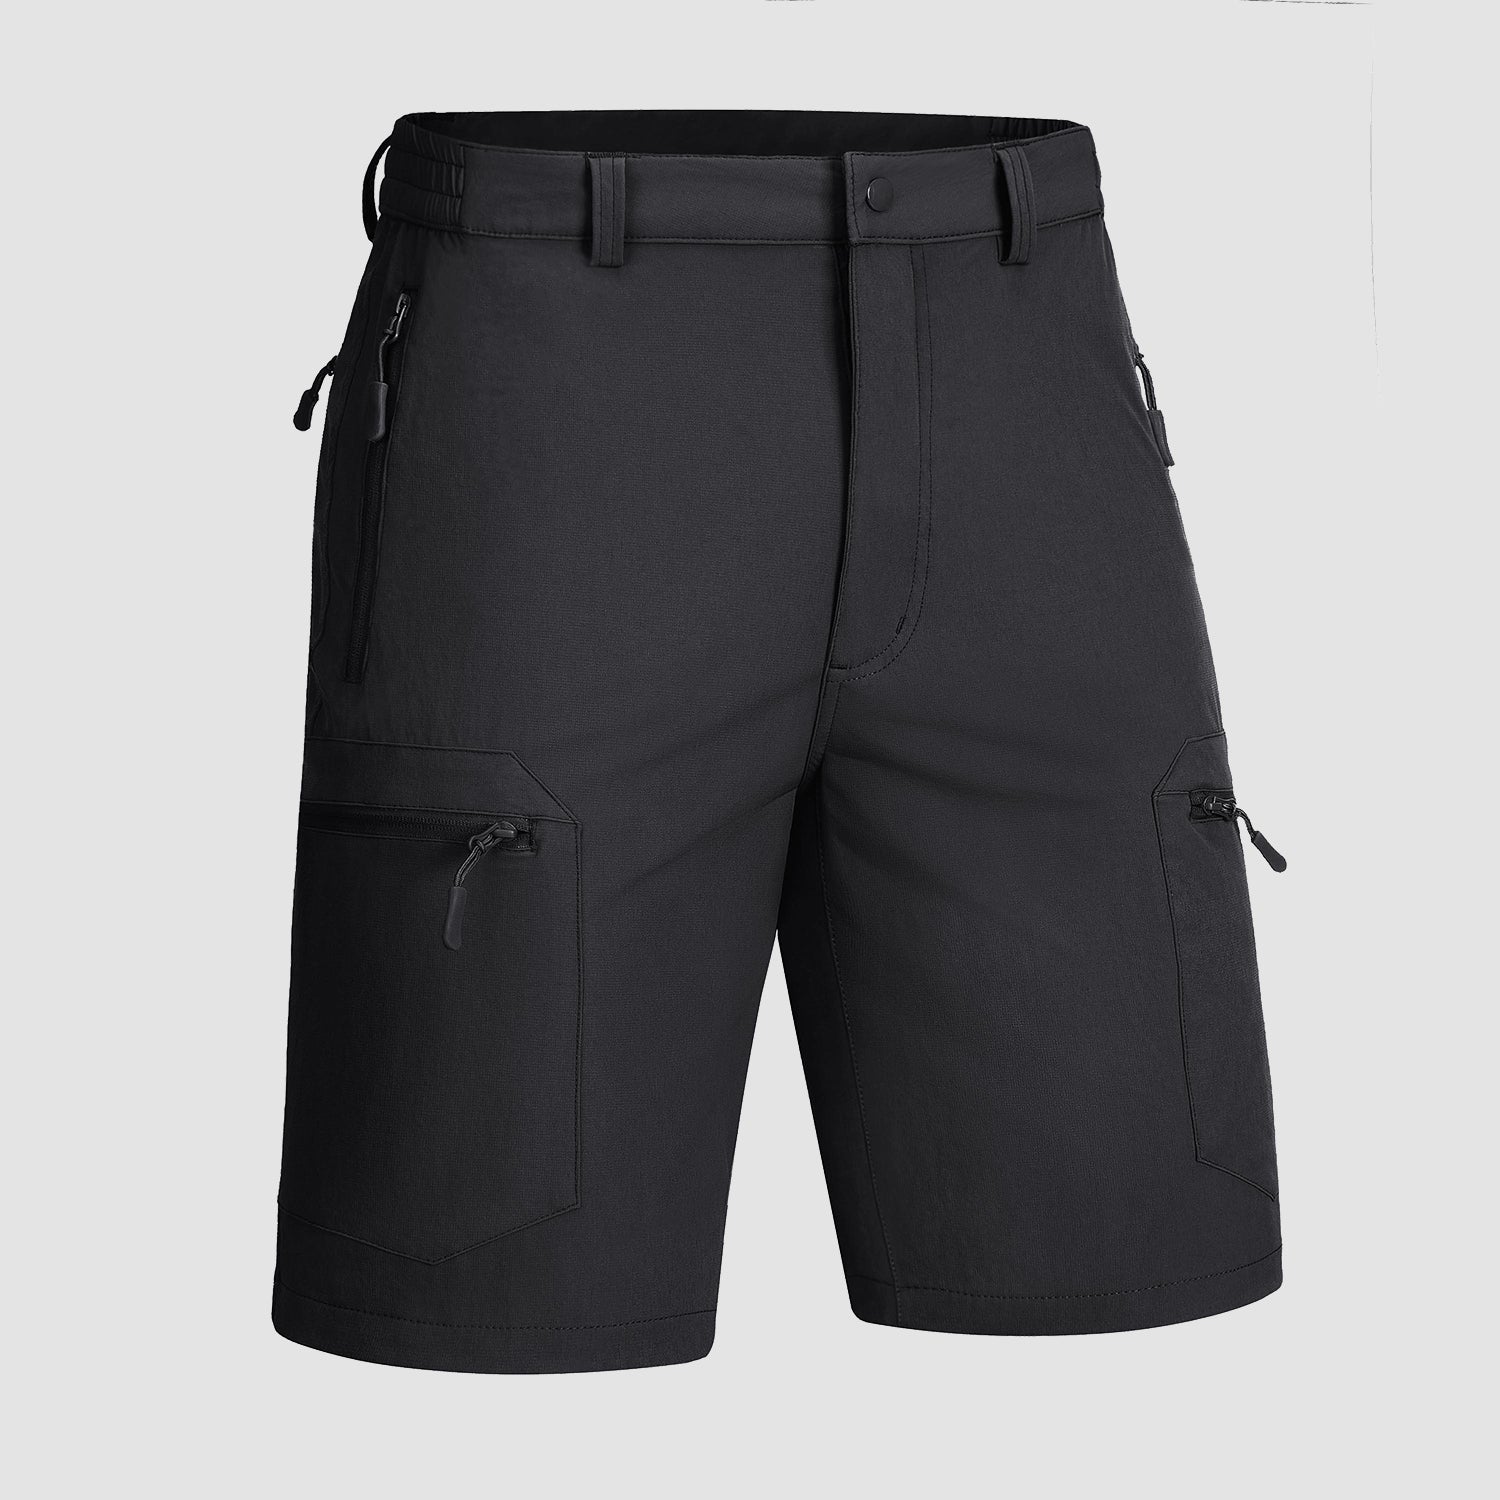 Men's Hiking Shorts with 5 Zipper Pockets Water-Resistant Ripstop Outdoor Shorts